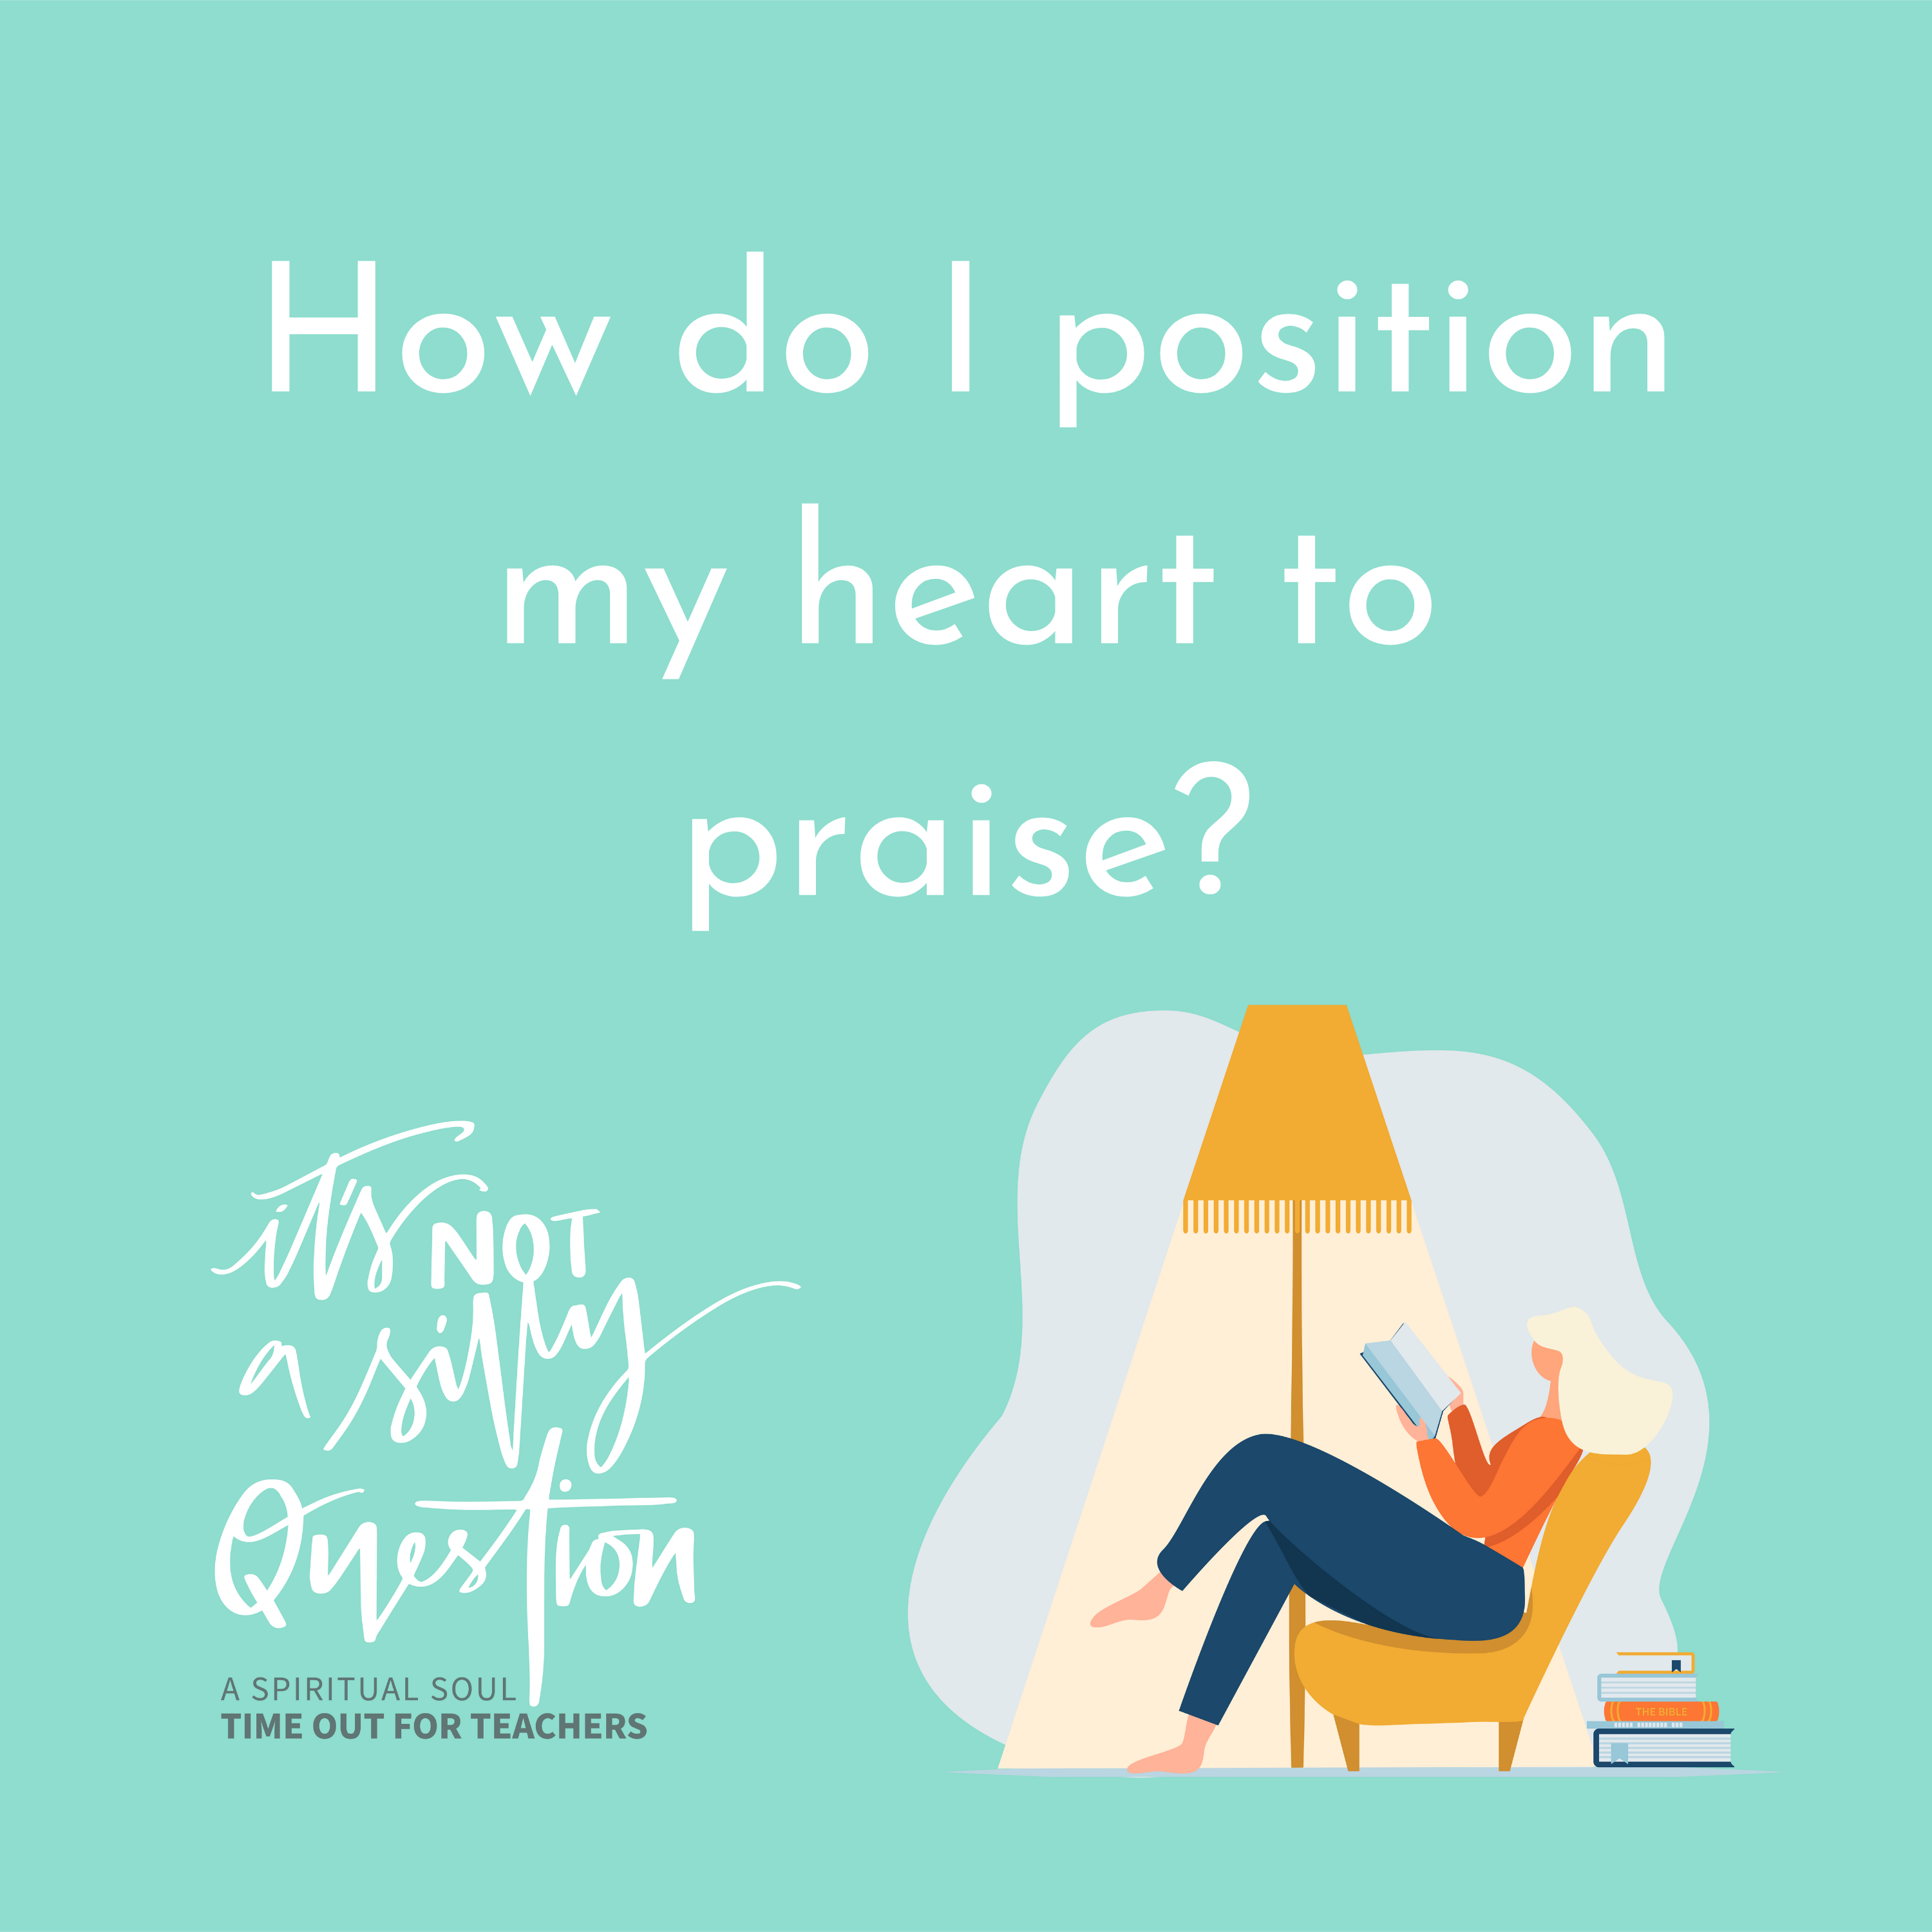 How can I position my heart to praise?